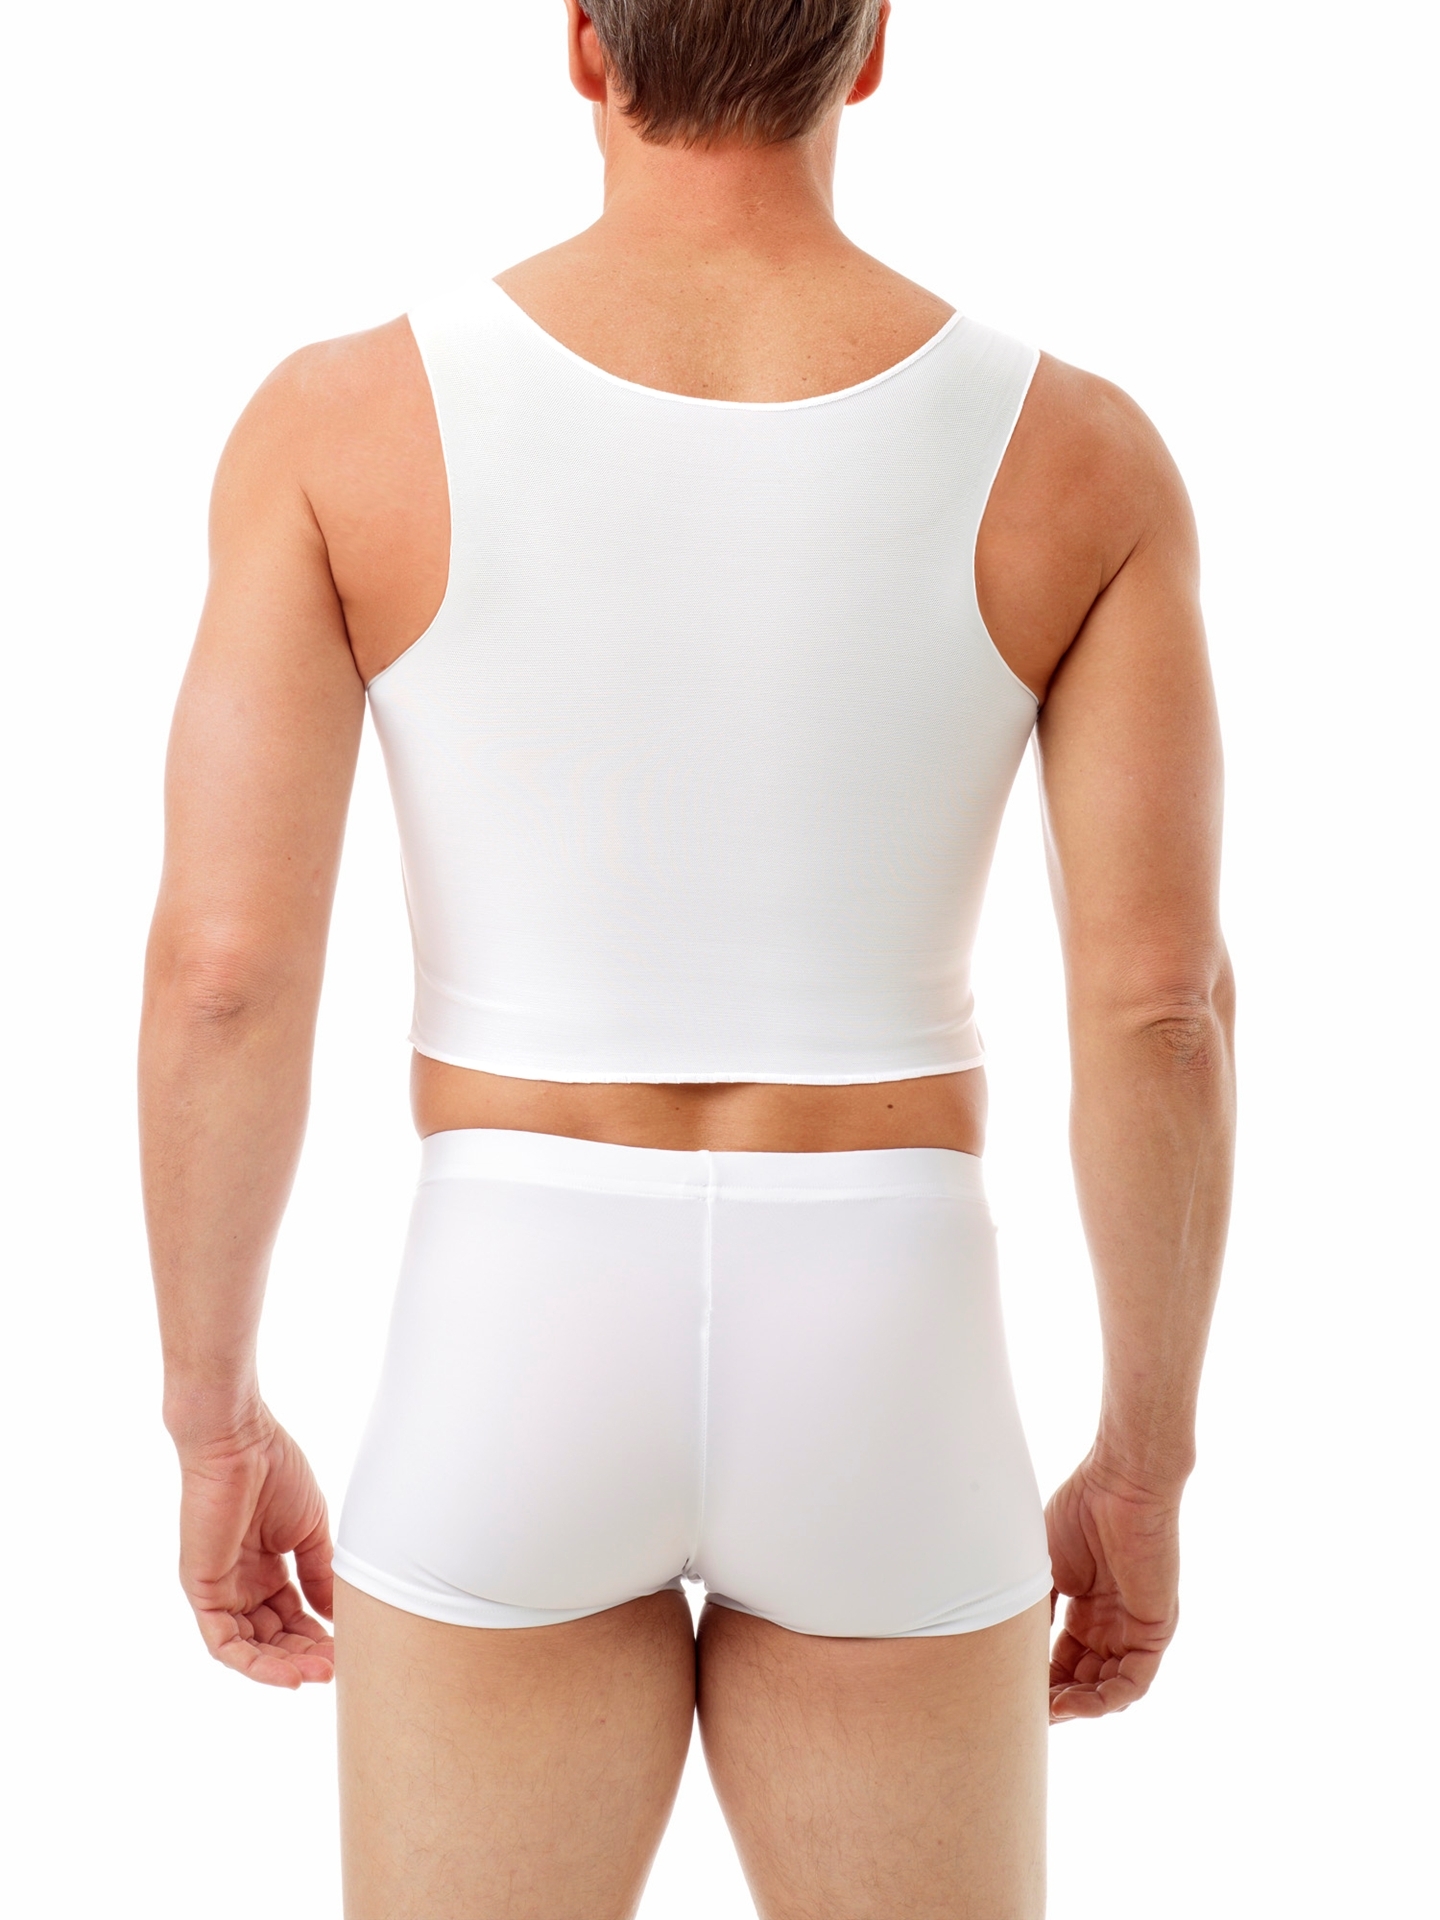 Men's Power Chest Binder Top, Made in the USA